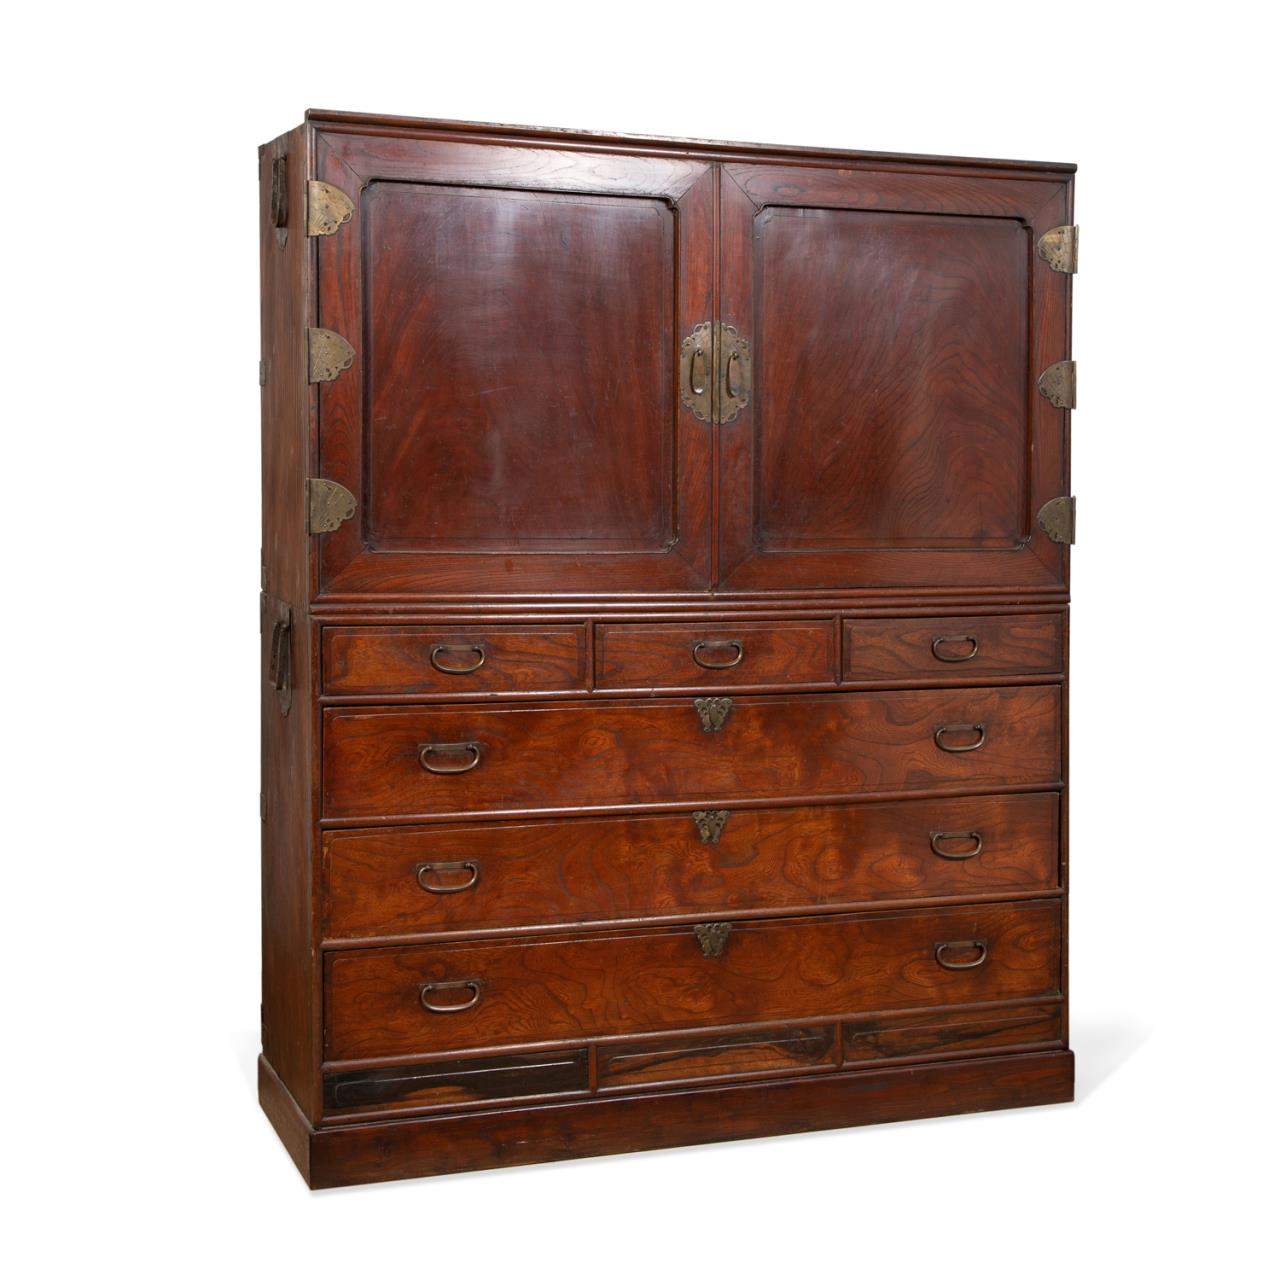 CHINESE RED STAINED WOOD CABINET